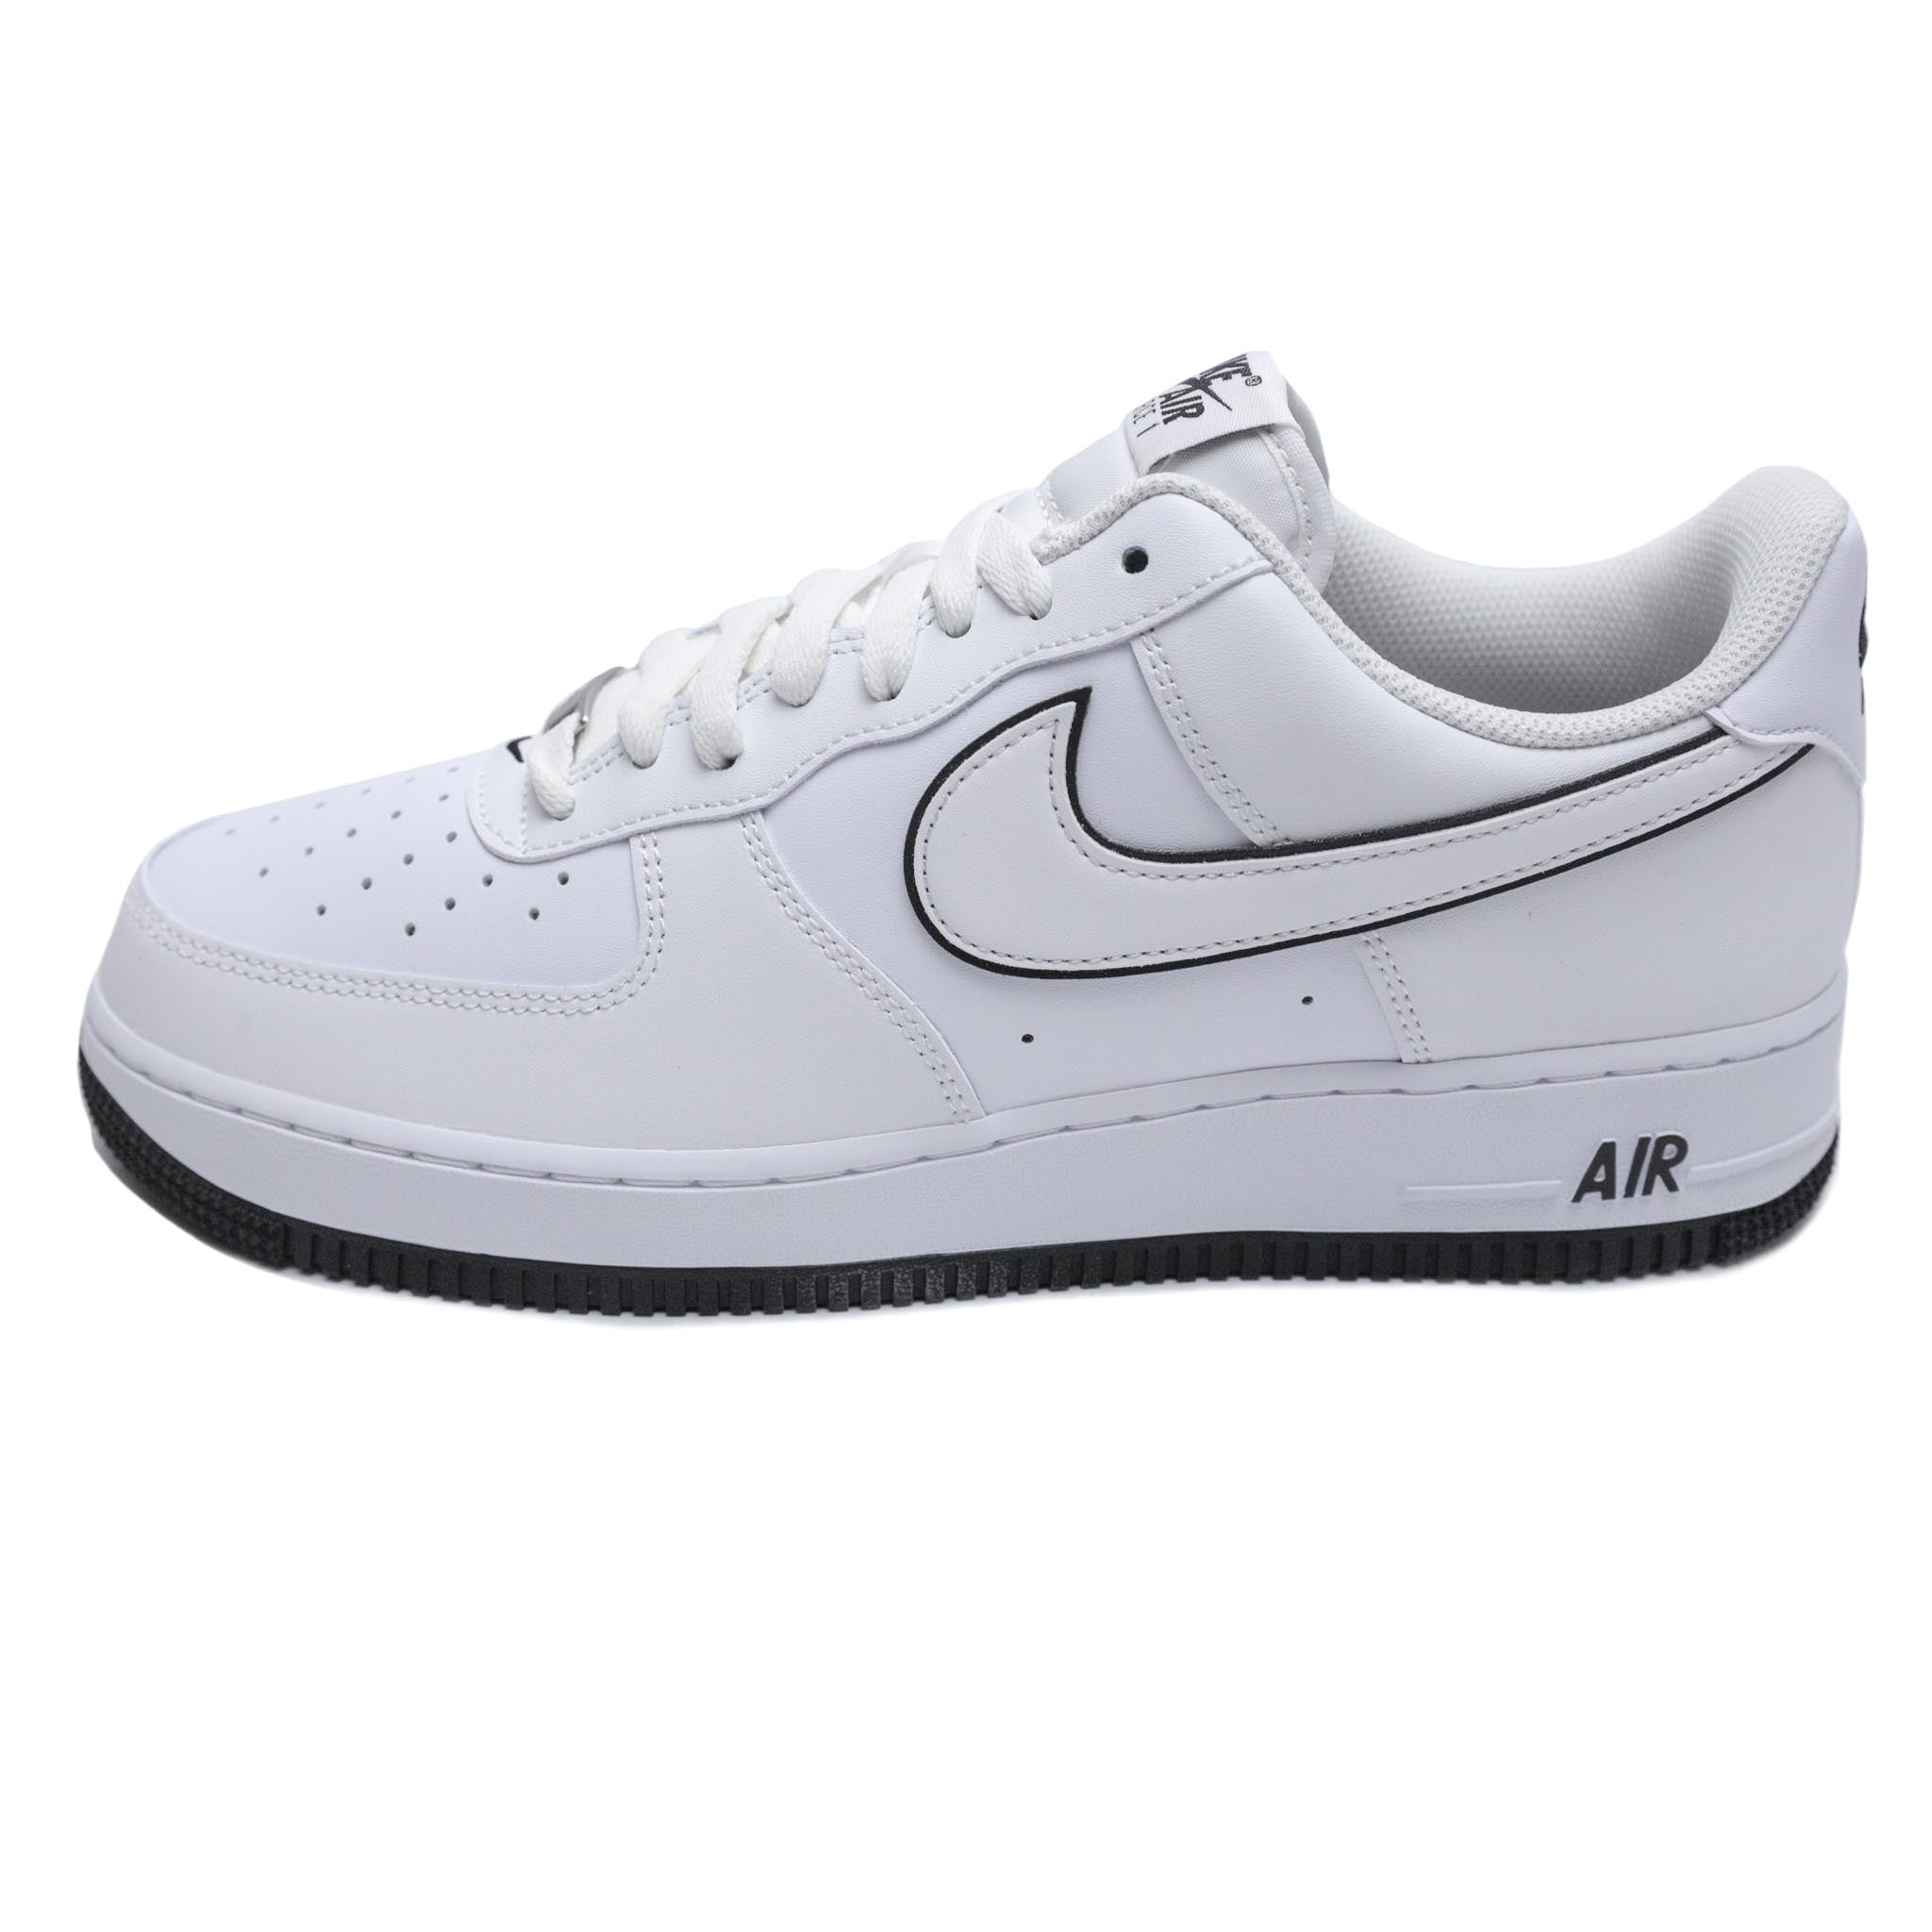 Nike Air Force 1 Low '07 'White/Black Outline'